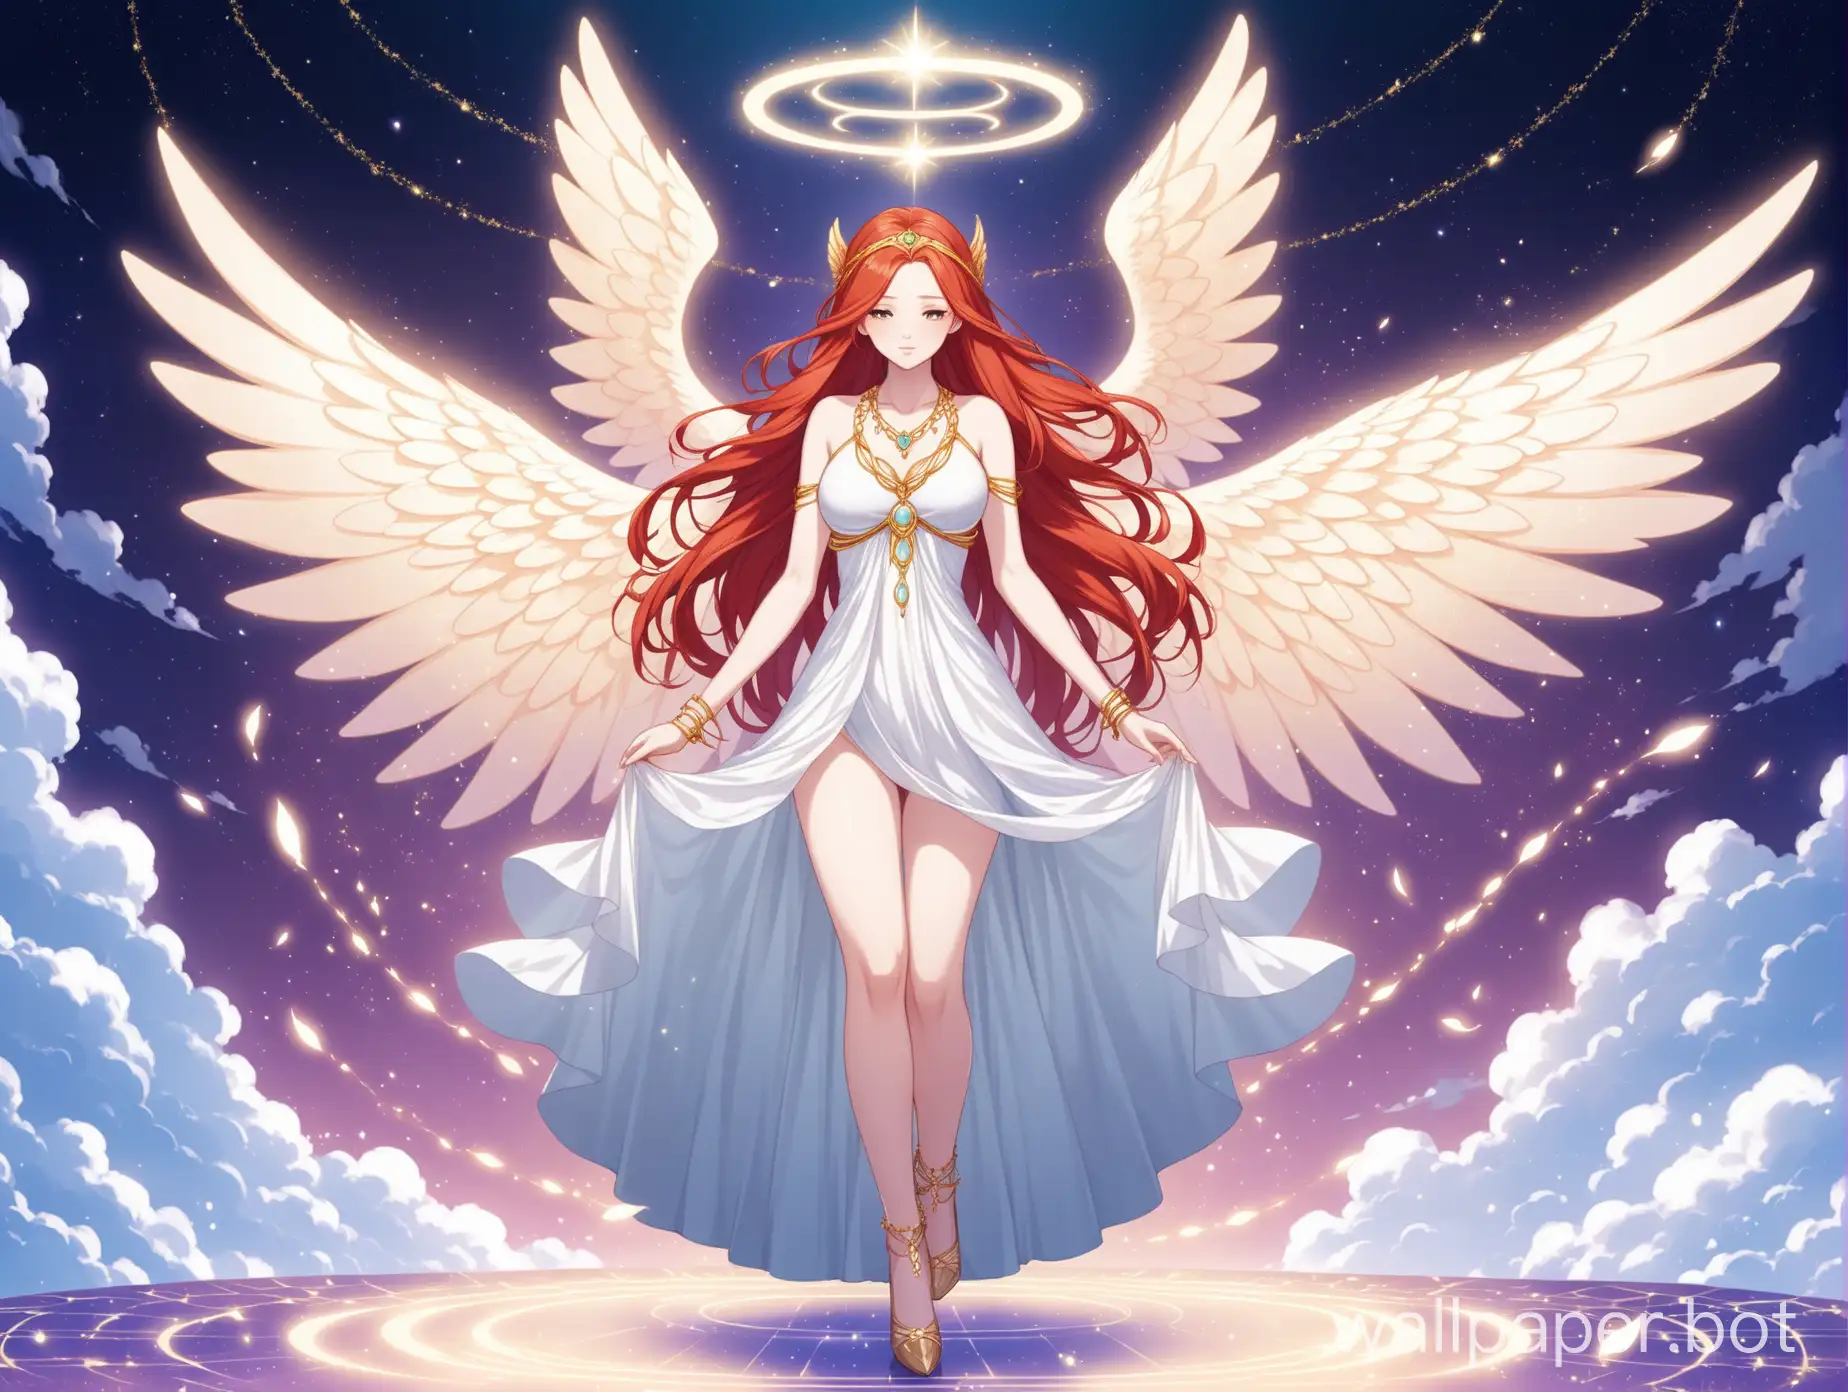 Ethereal-Redhead-Goddess-Levitating-with-Halo-and-Wings-in-Anime-Style